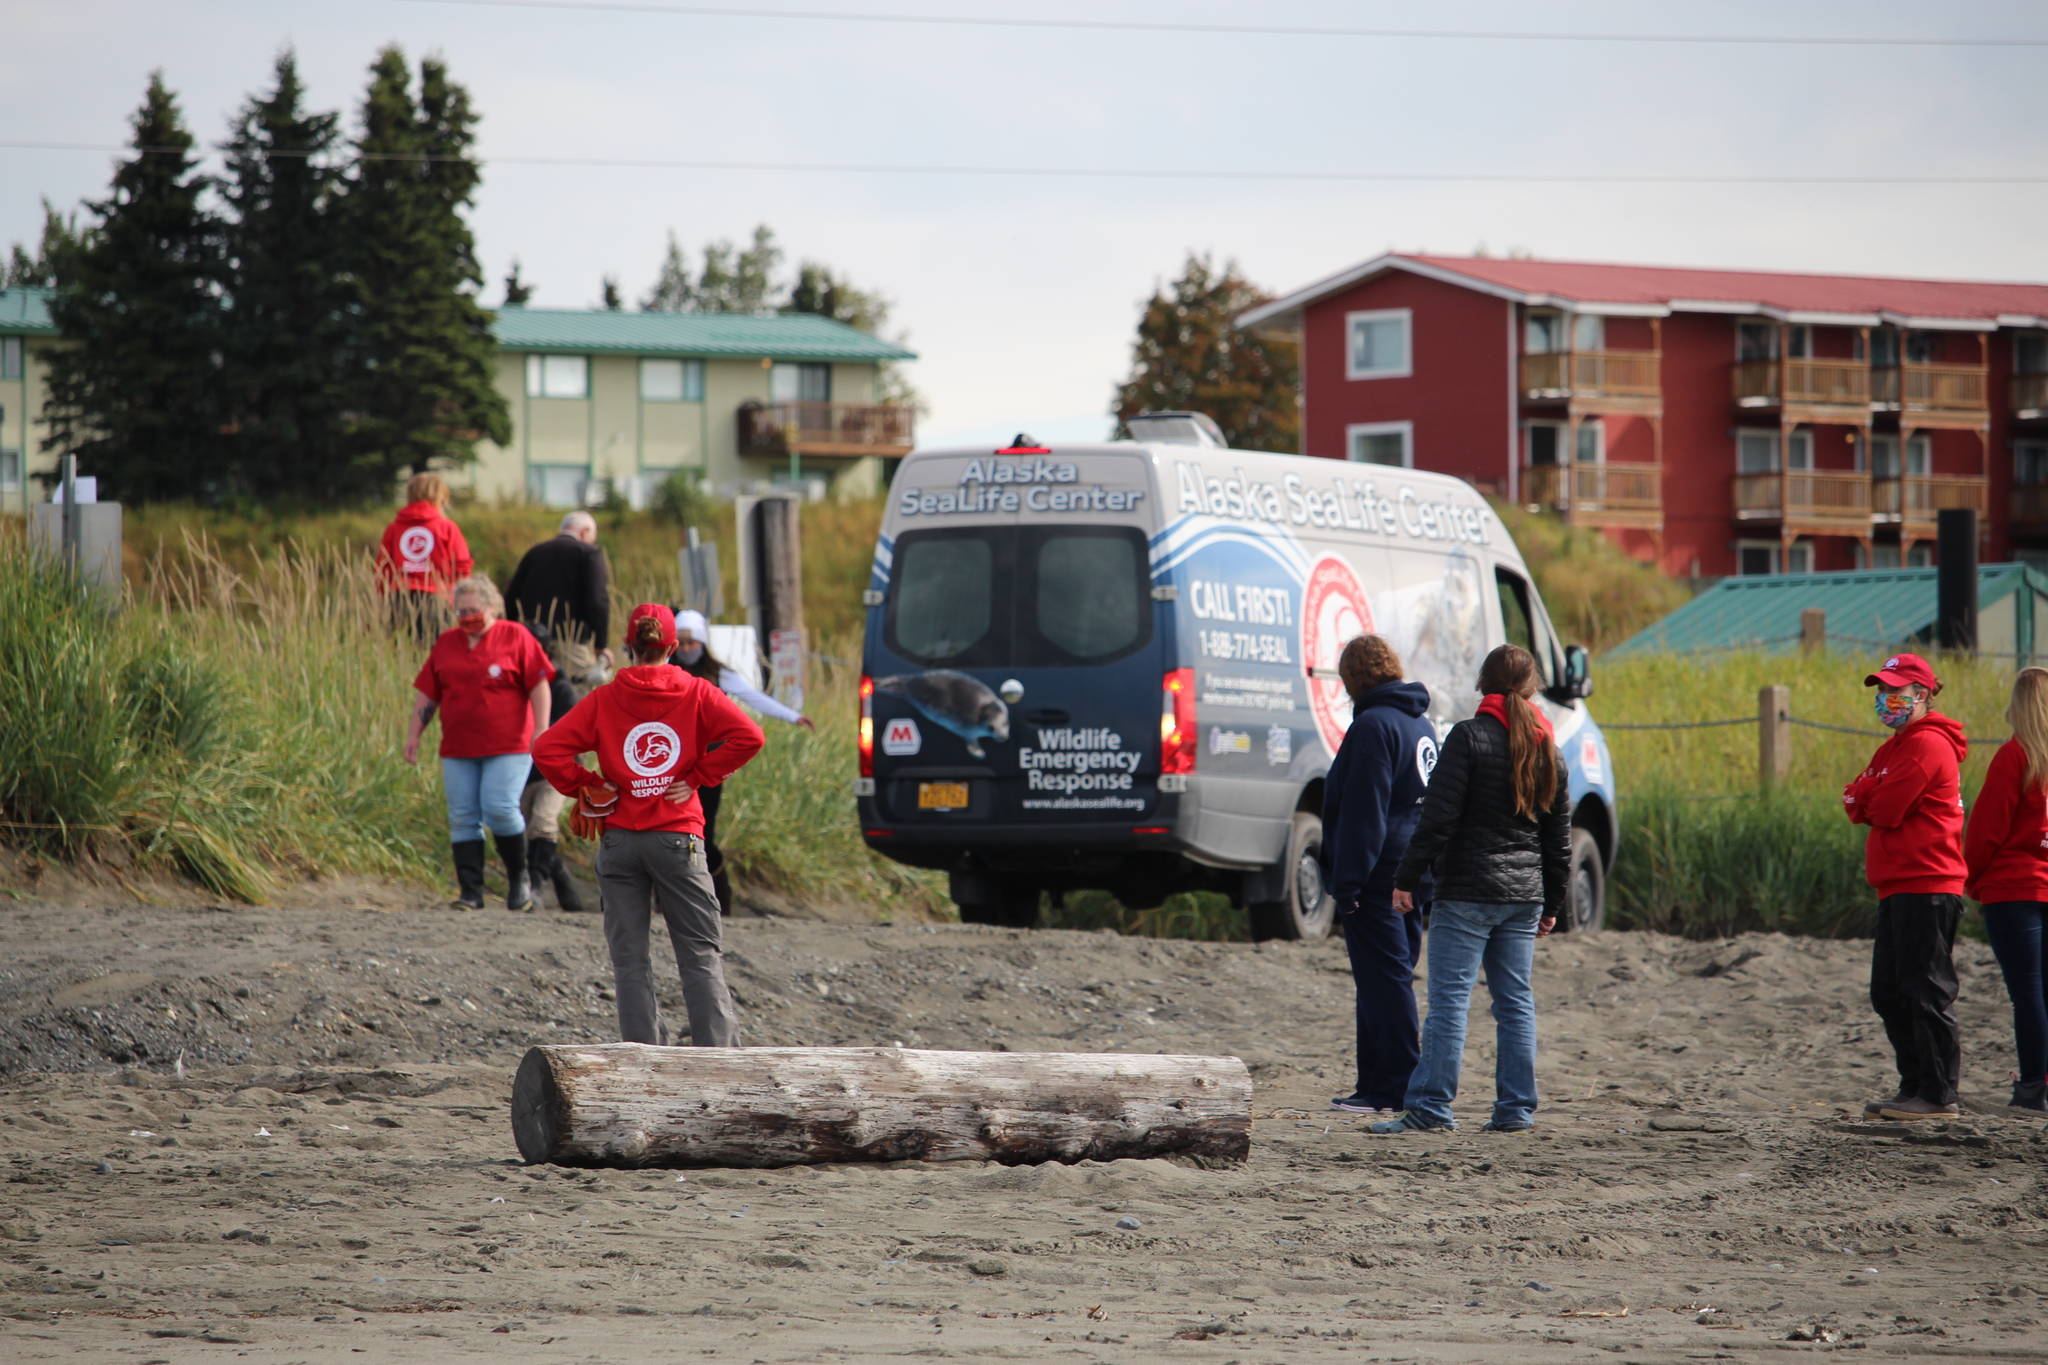 Staff and volunteers with the Alaska SeaLife Center bring five Harbor Seal pups down to the Kenai Beach to release them into the wild on Aug. 27, 2020. (Photo by Brian Mazurek/Peninsula Clarion)